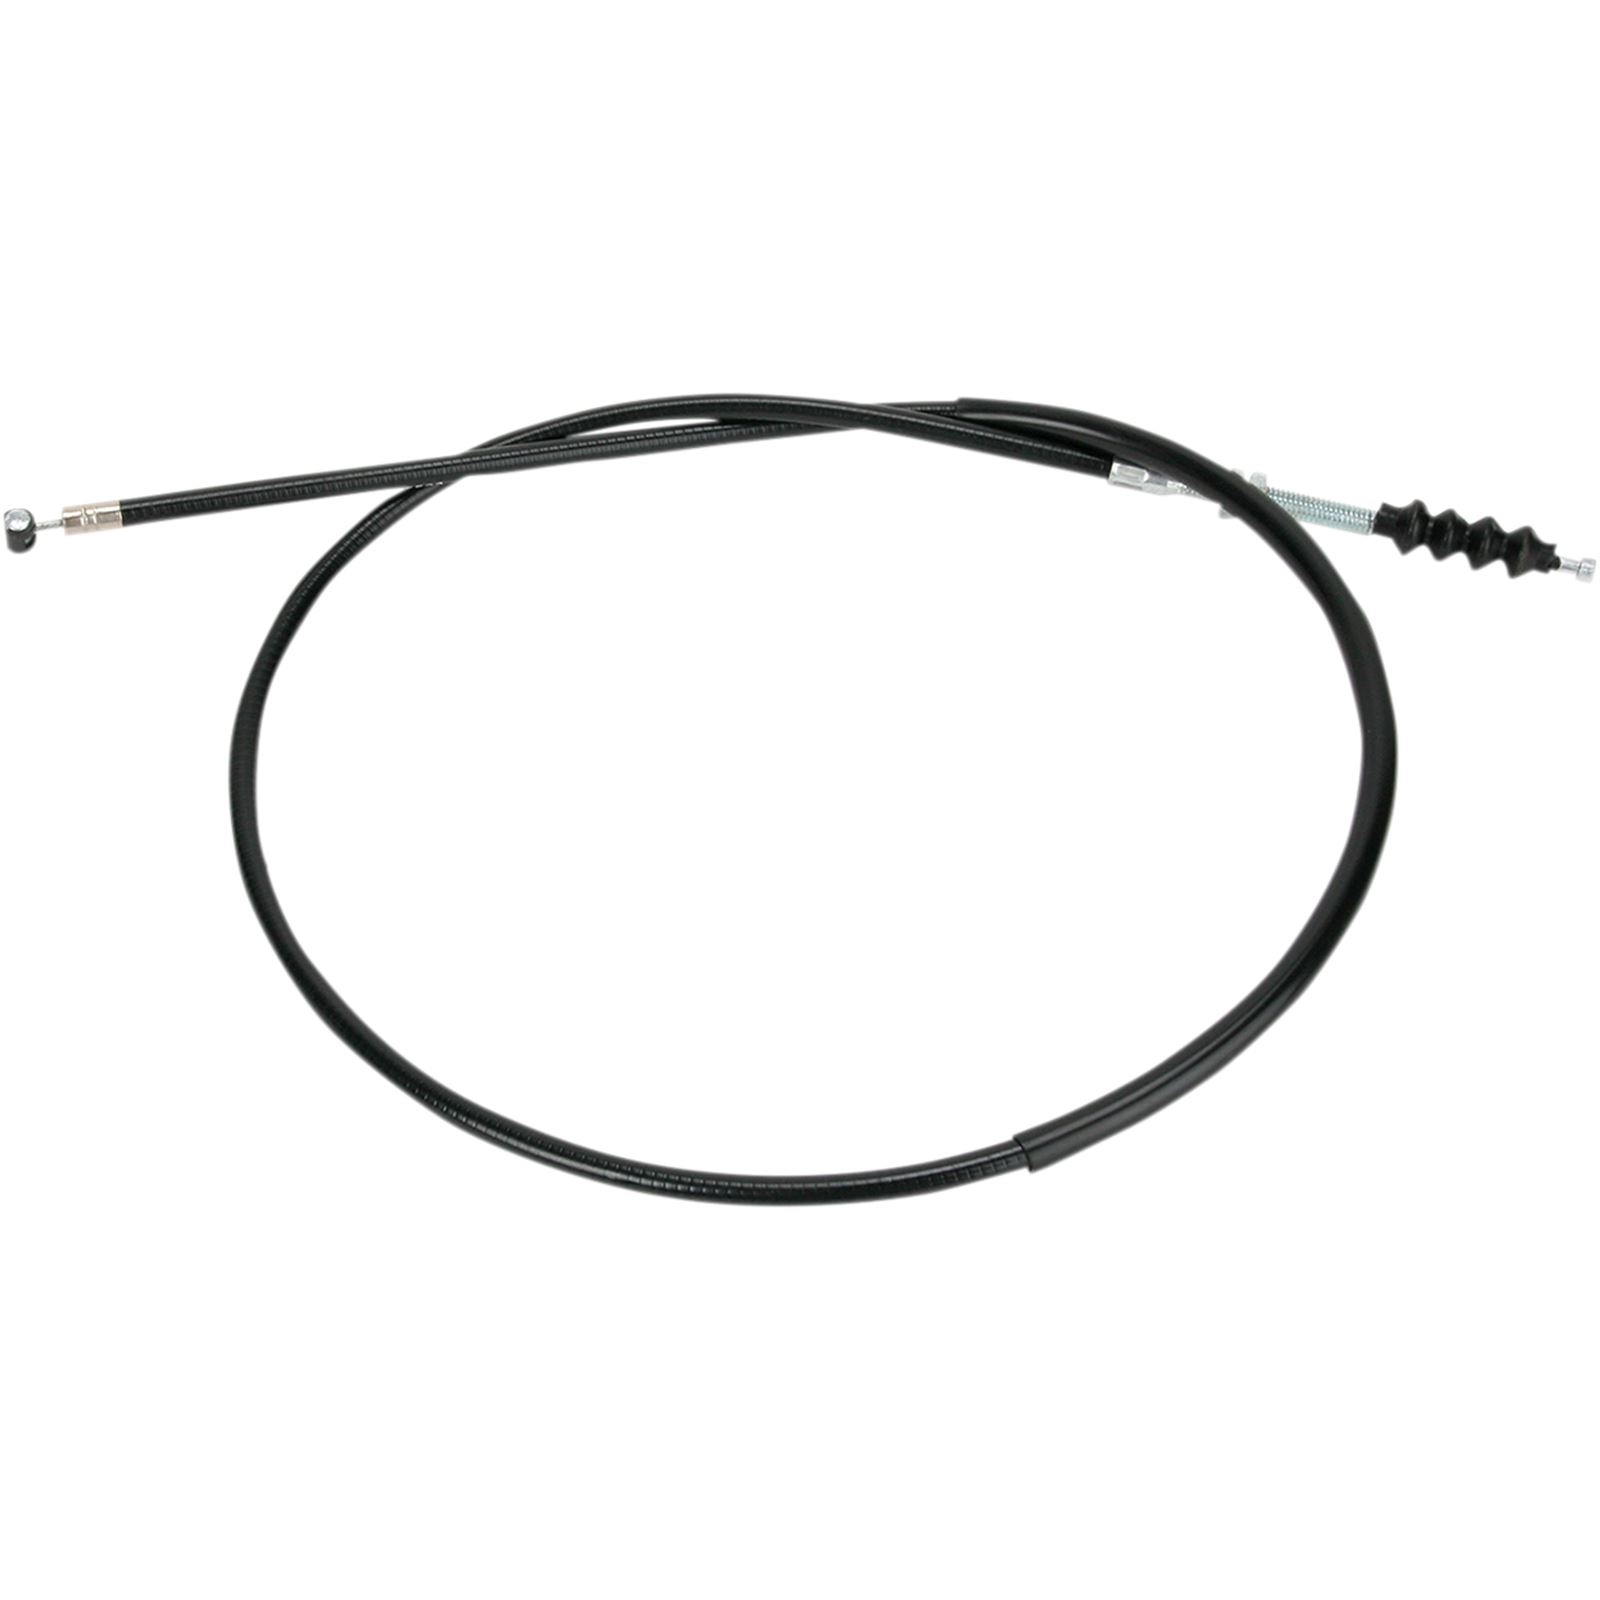 Parts Unlimited Clutch Cable for Honda